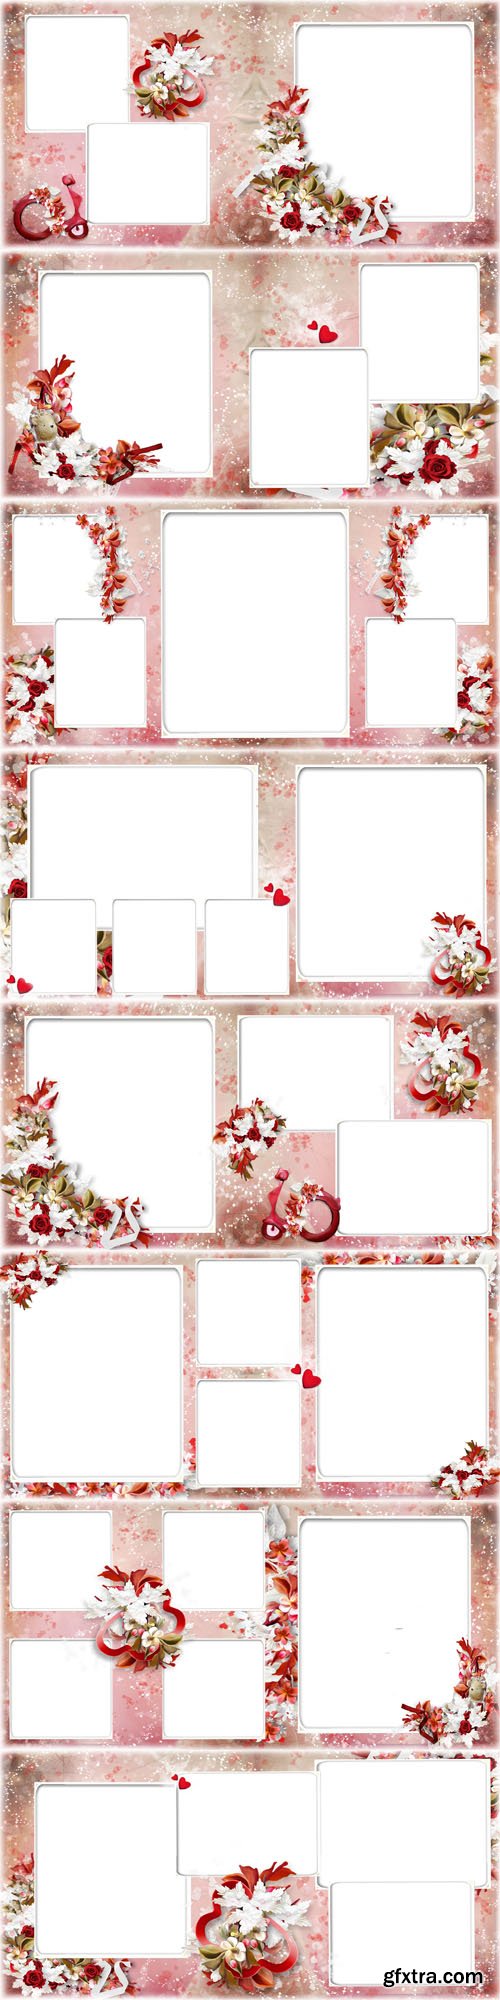 Winter Photo Album in Pink with Flowers PSD Templates